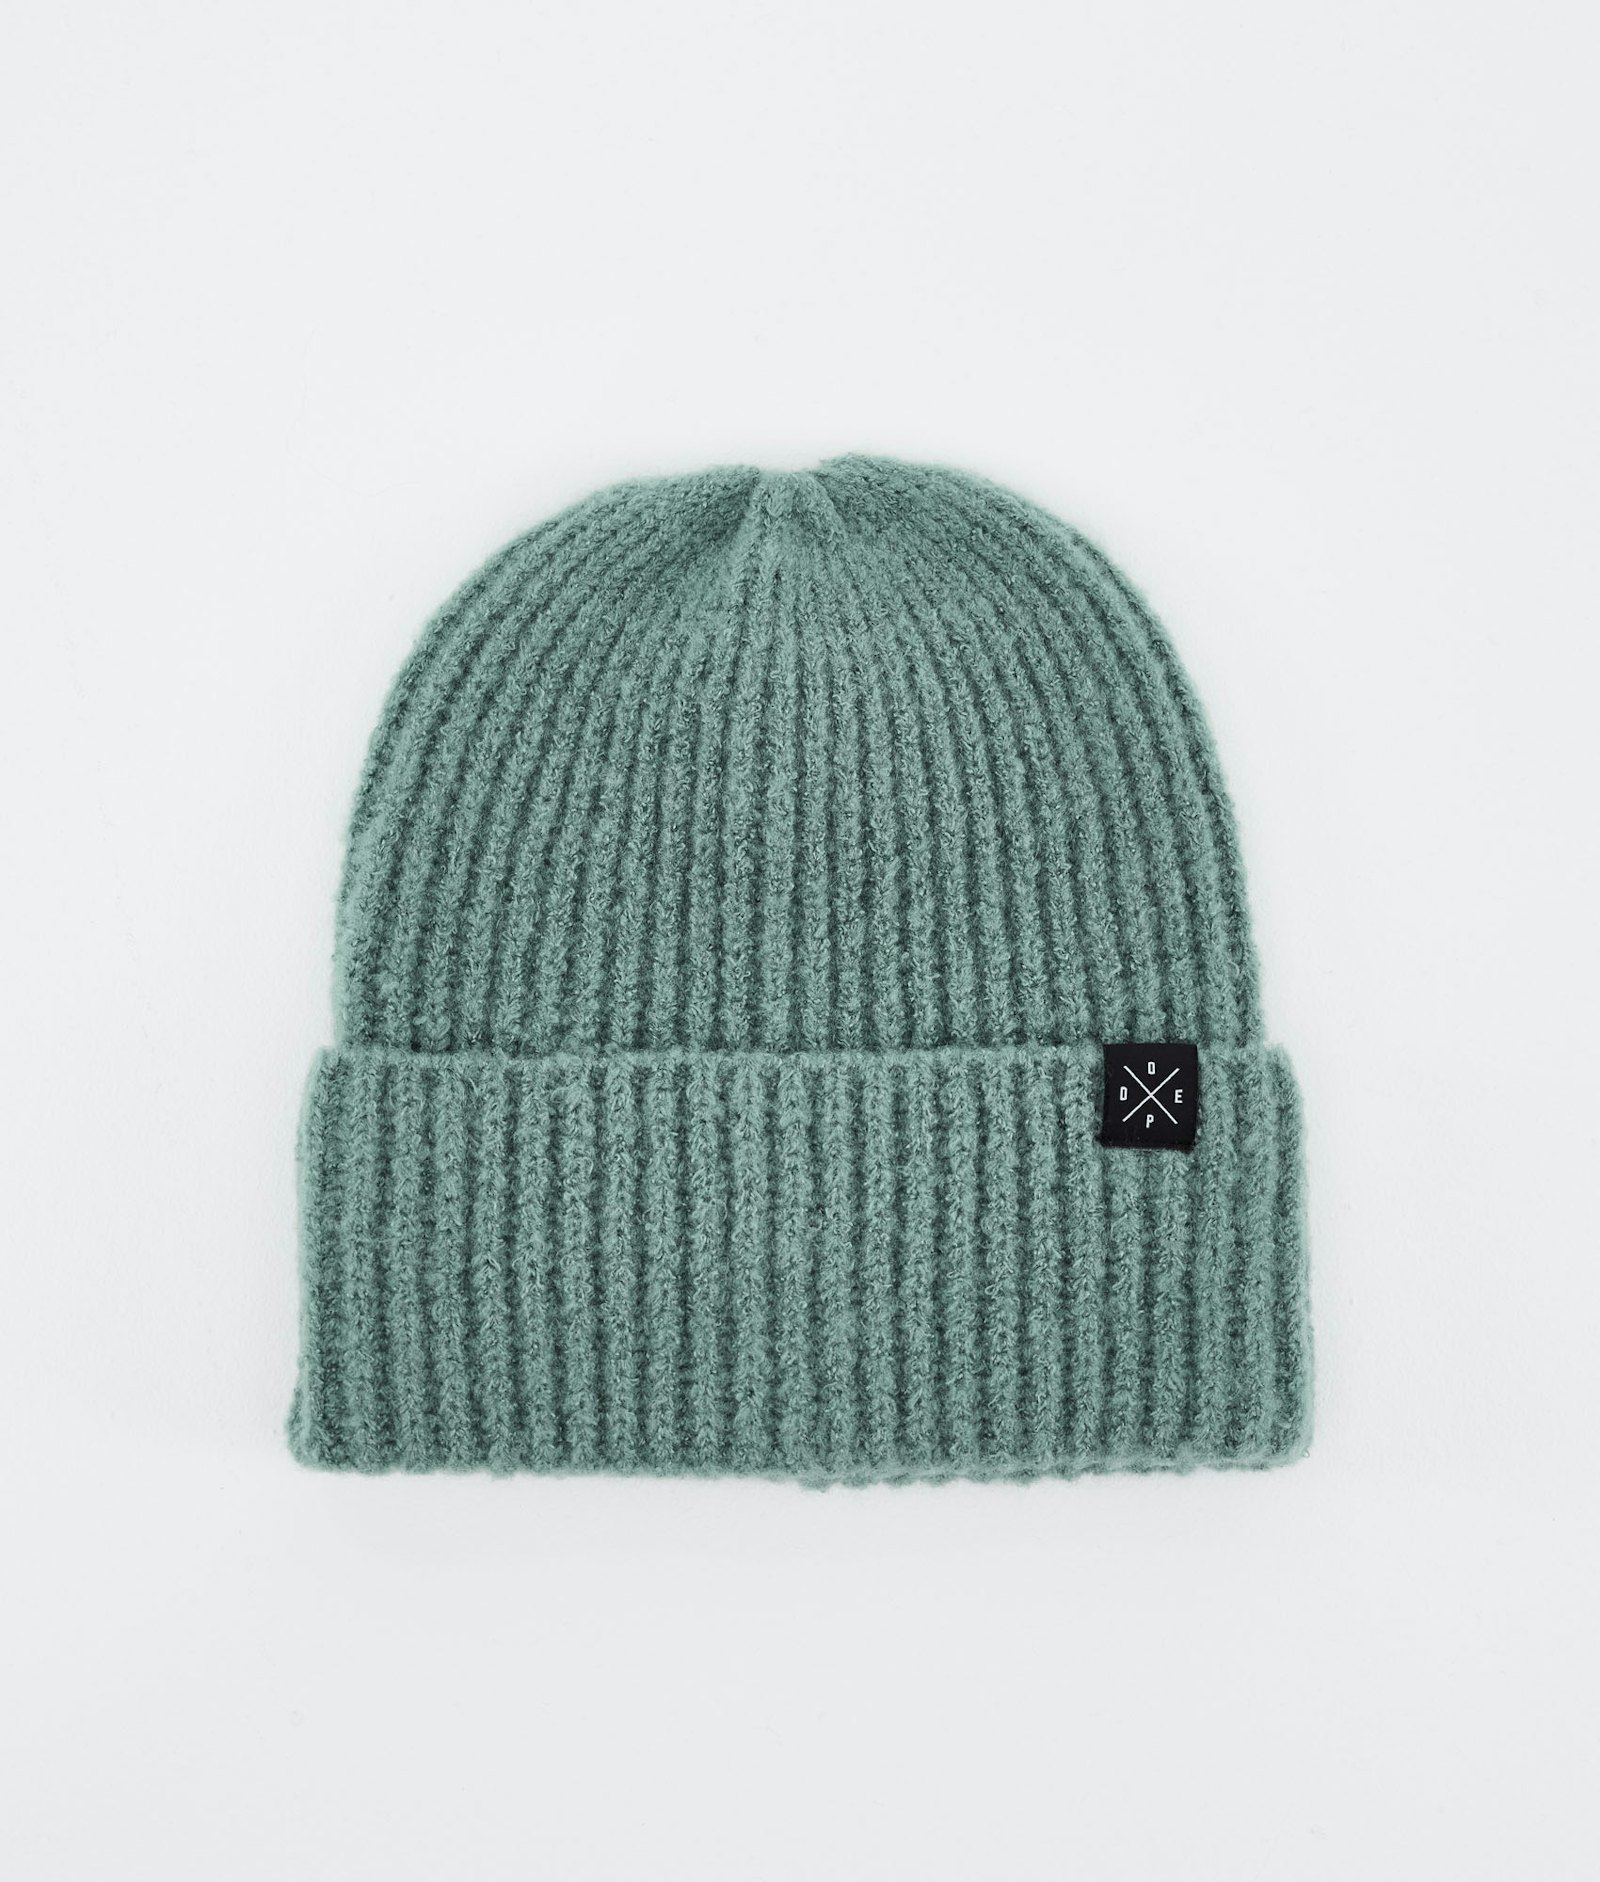 Dope Chunky 2021 Beanie Faded Green, Image 1 of 3